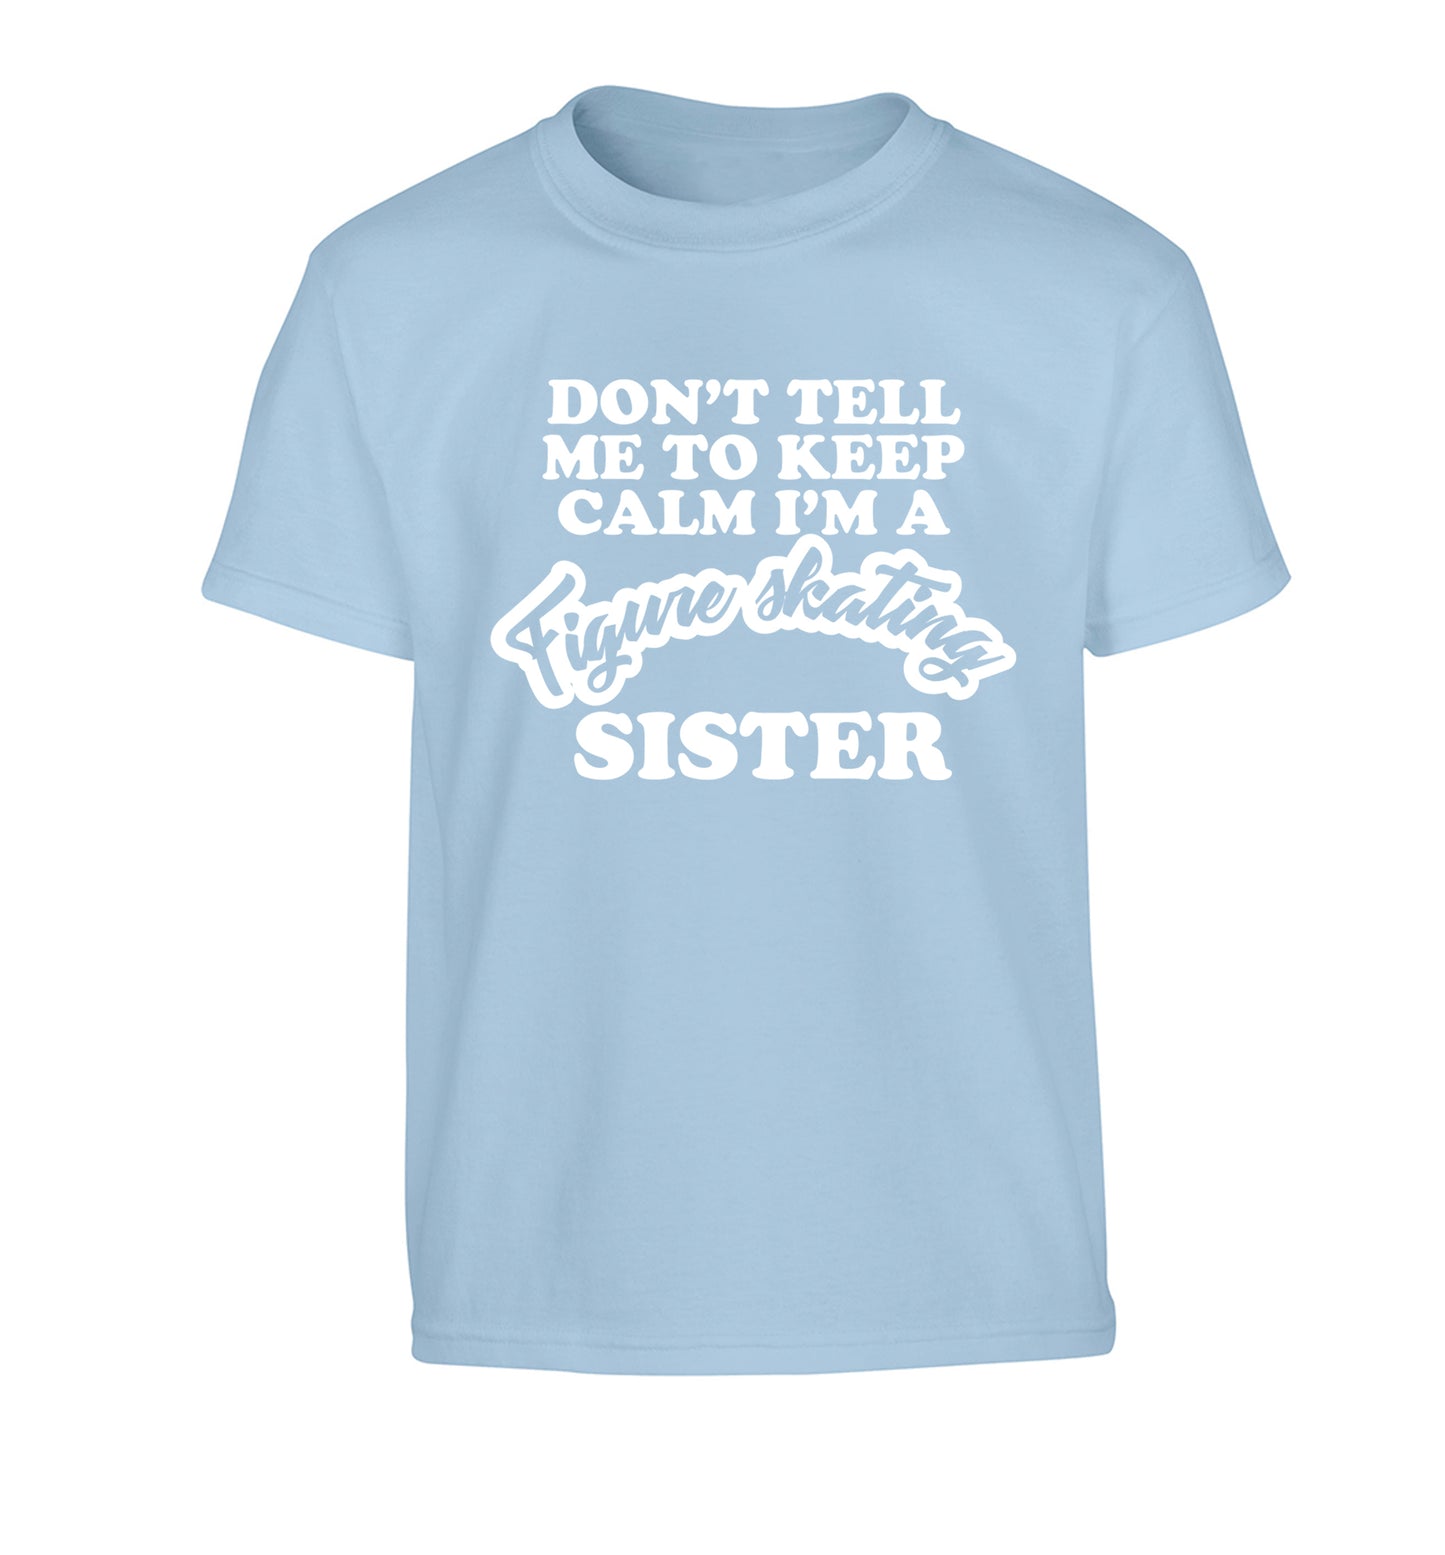 Don't tell me to keep calm I'm a figure skating sister Children's light blue Tshirt 12-14 Years